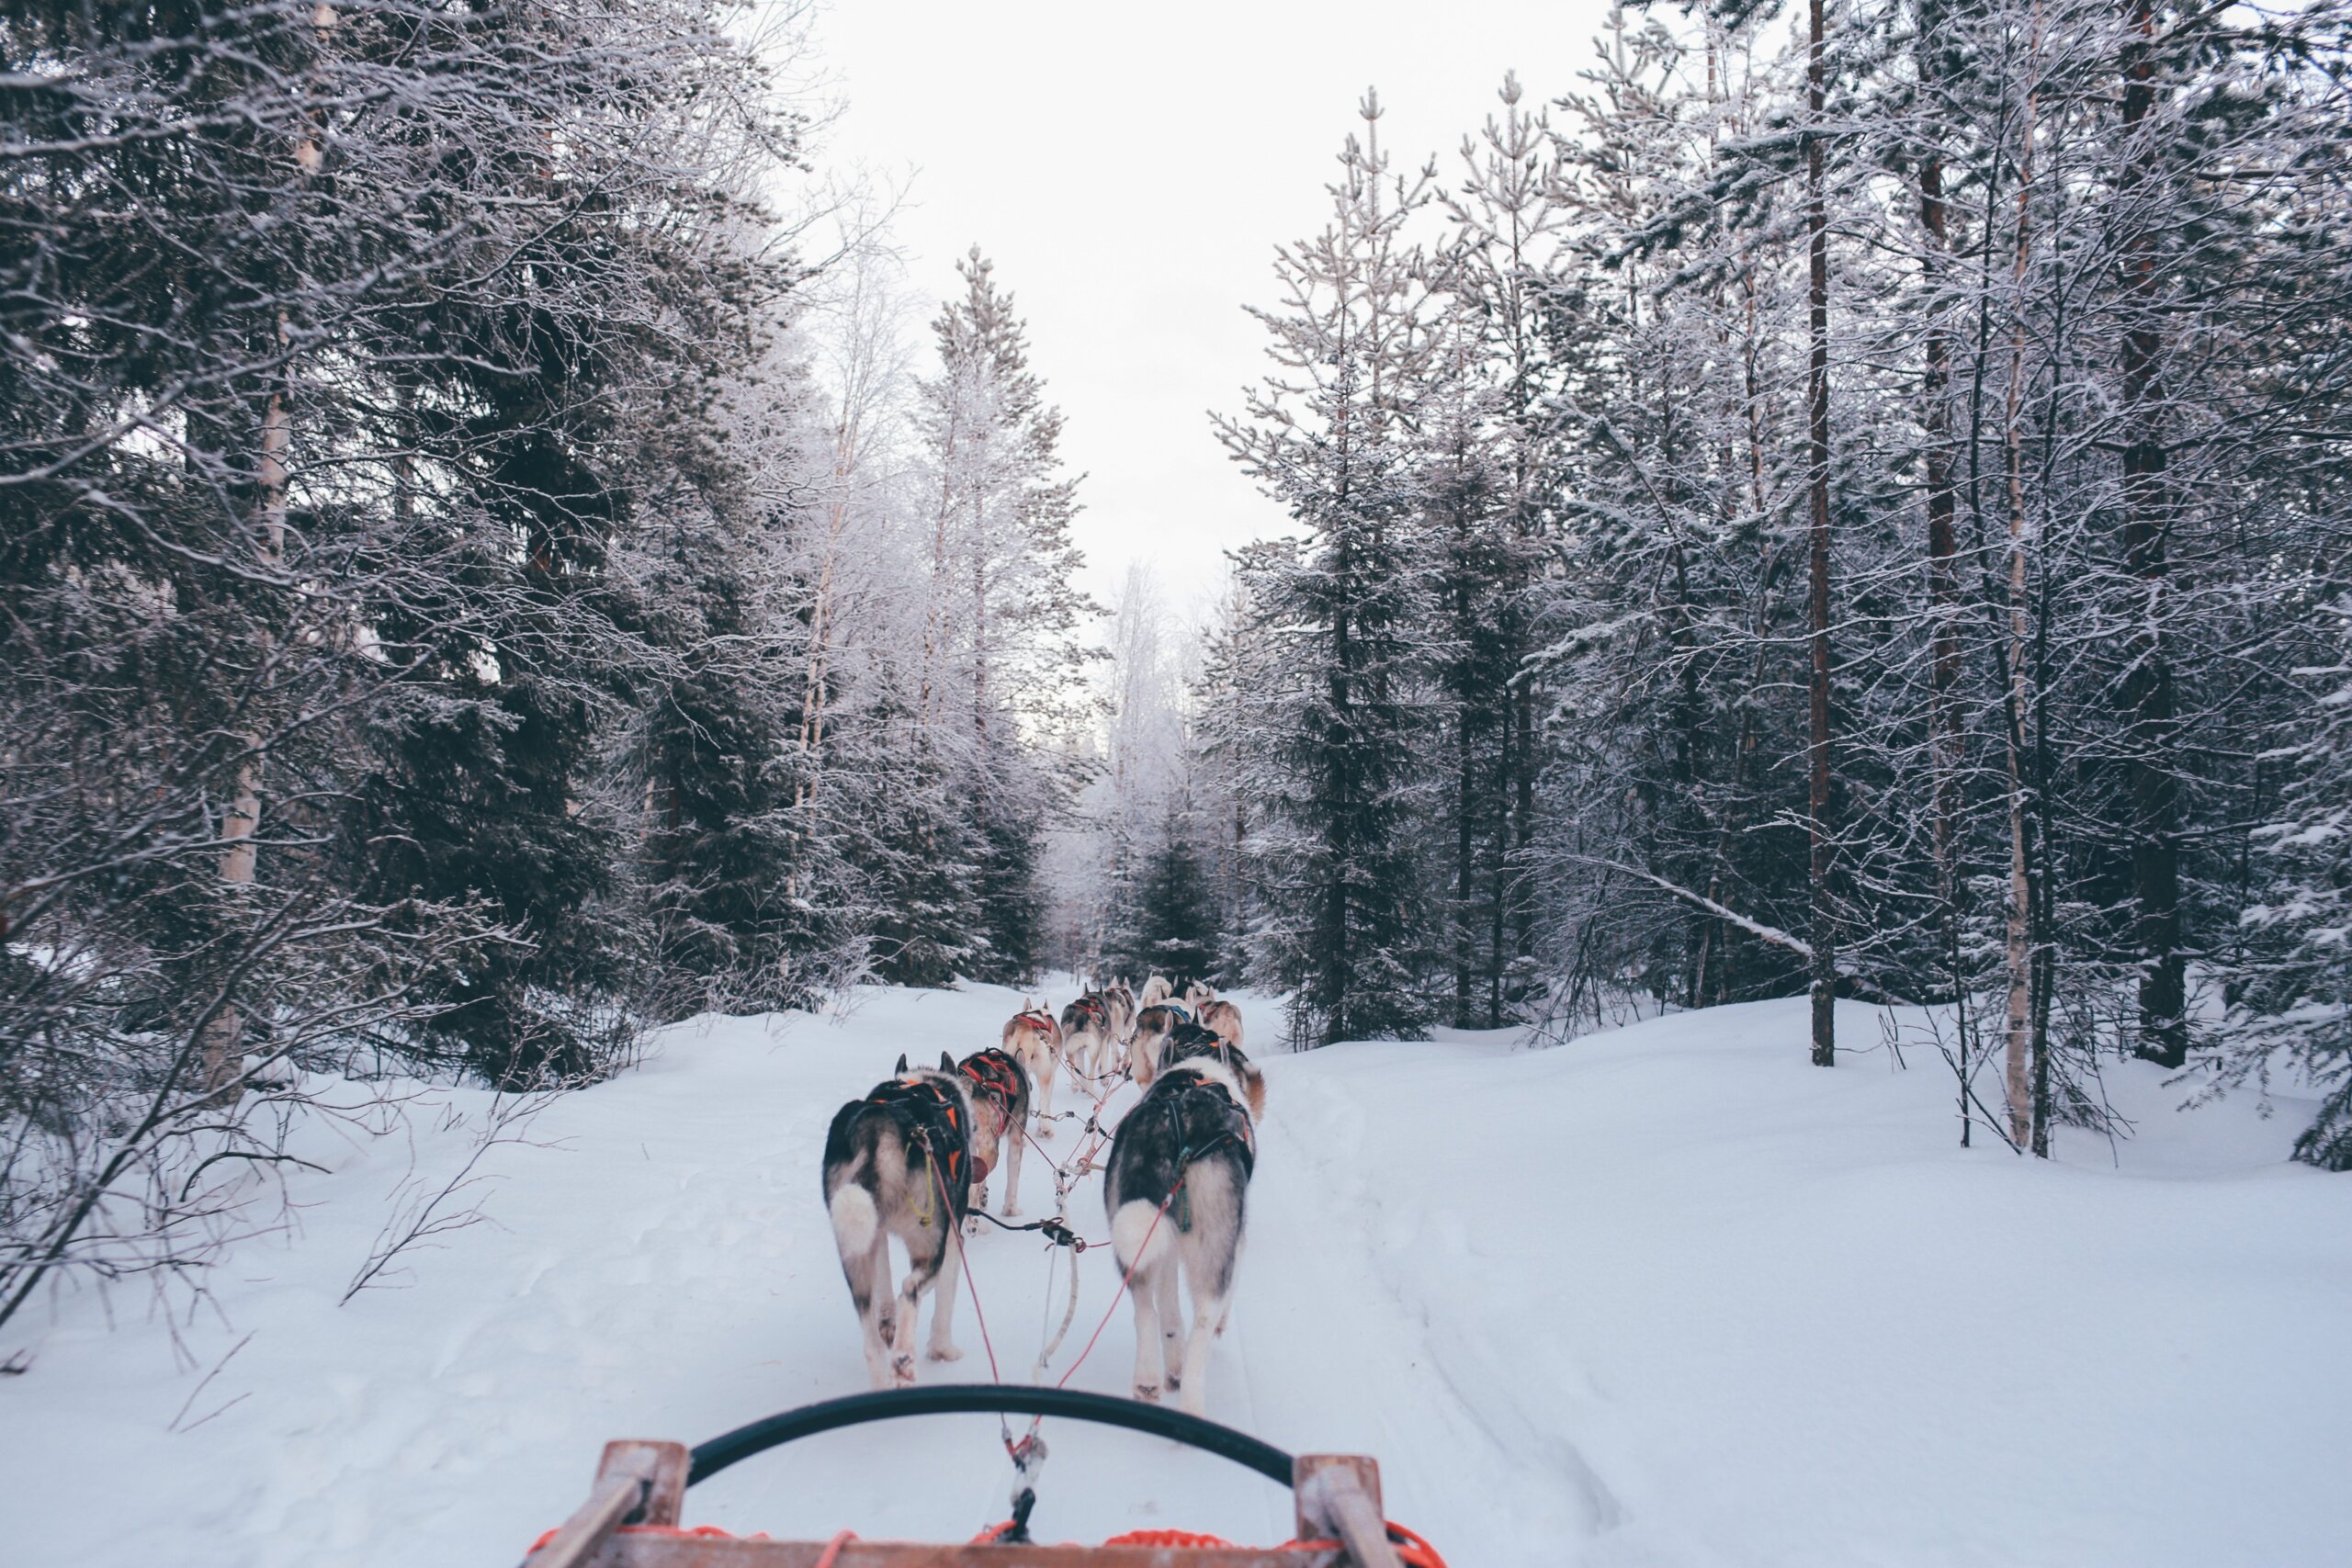 Dogs leading sled in snow